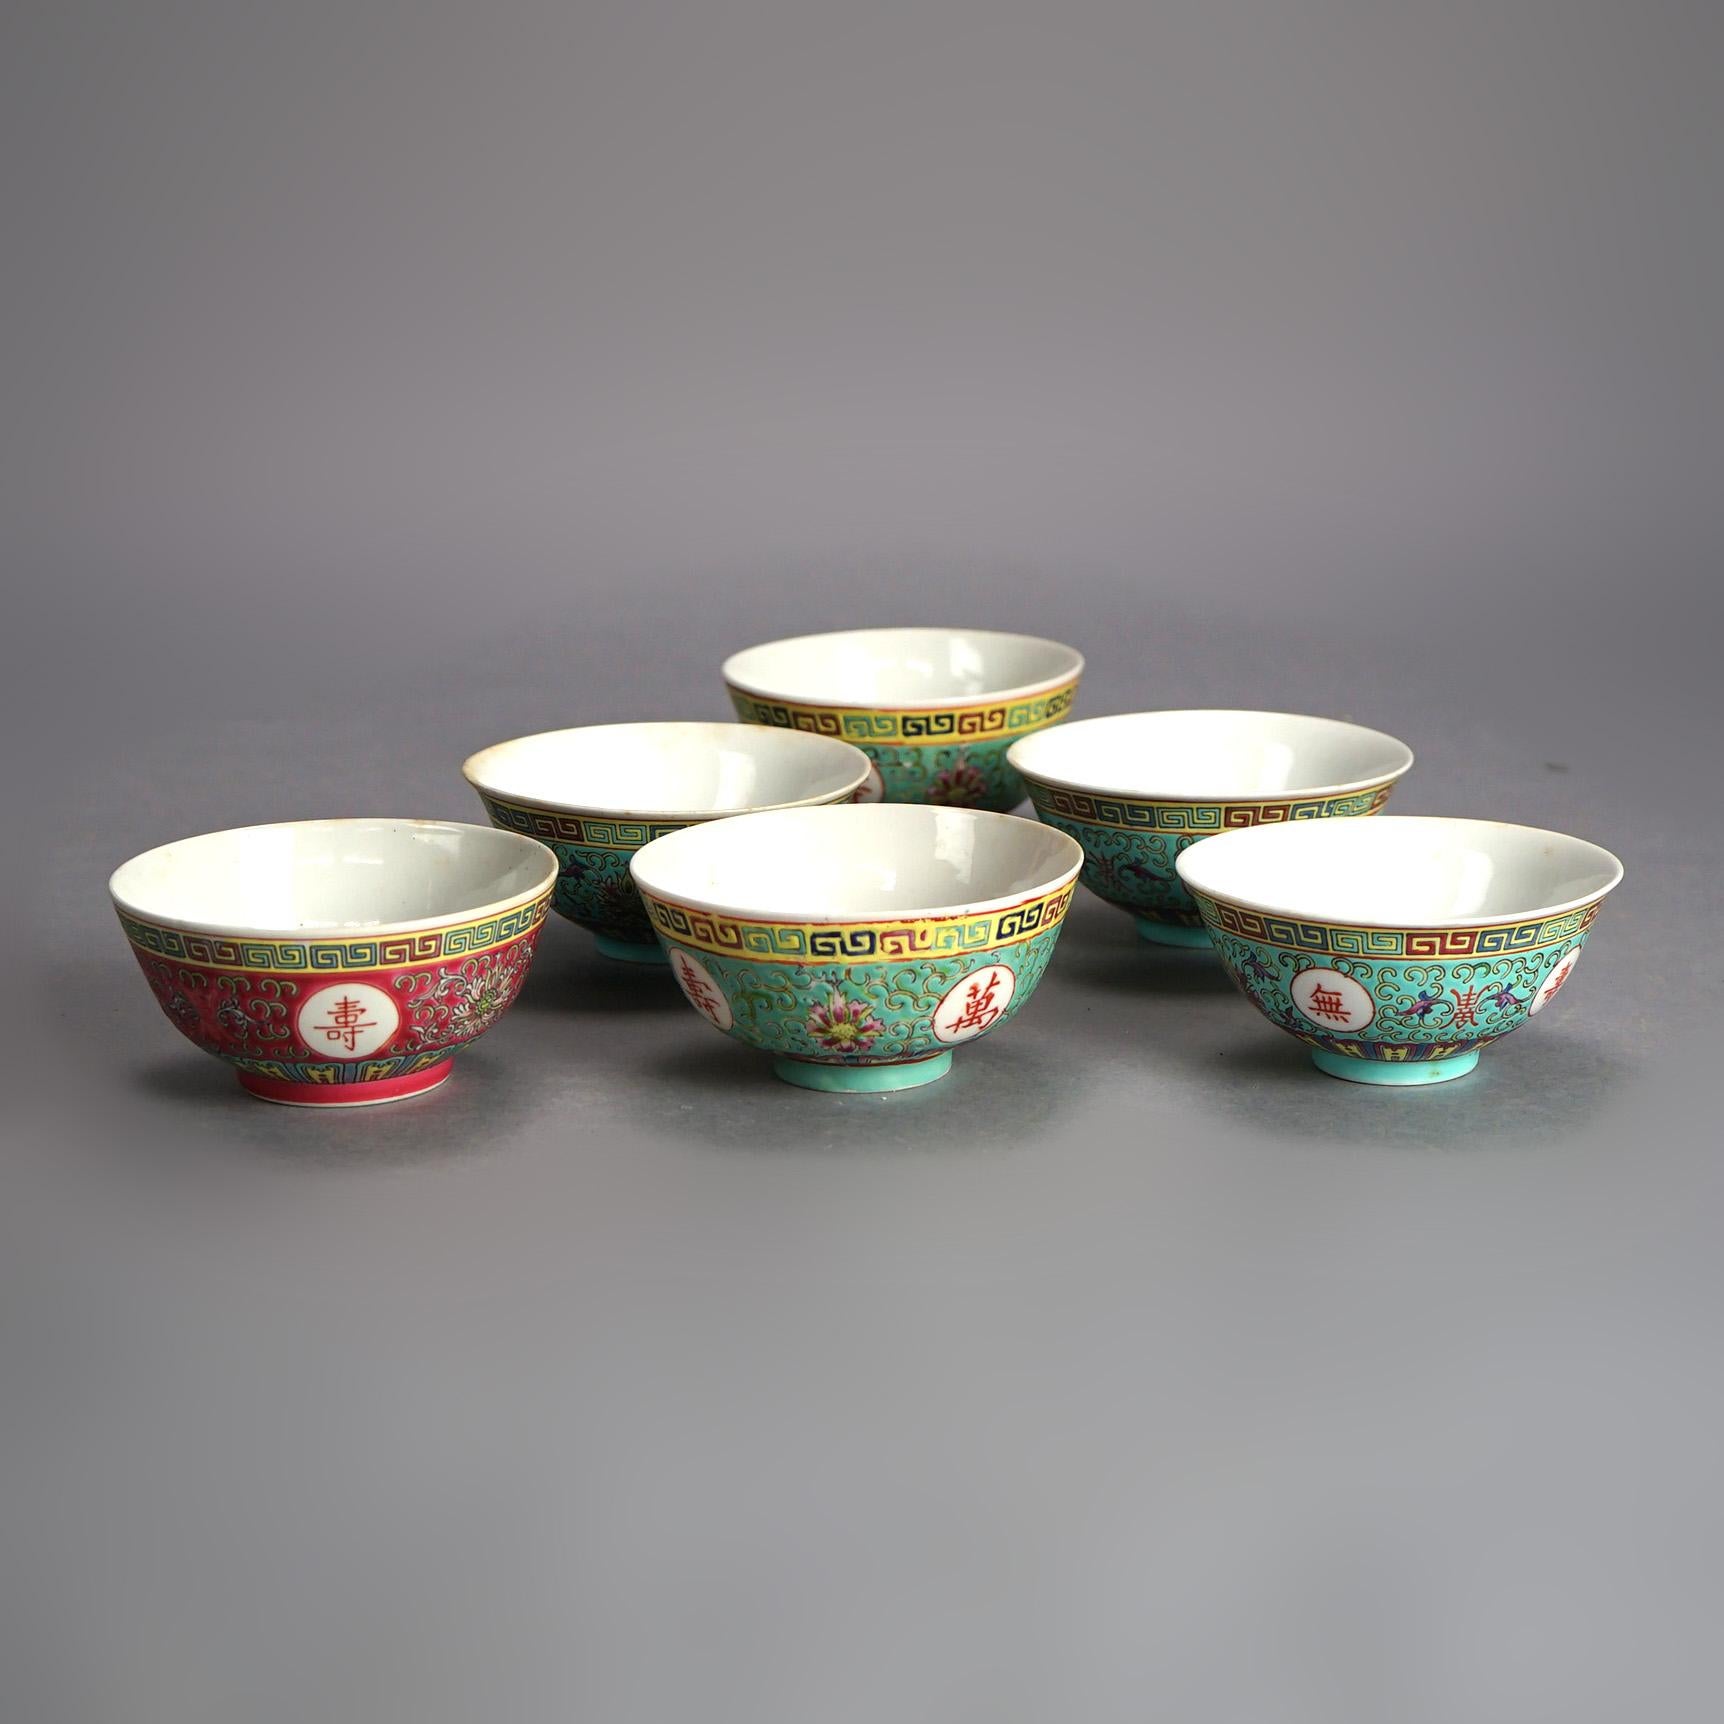 Six Antique Chinese Porcelain Enamel Decorated Rice Bowls C1910 In Good Condition For Sale In Big Flats, NY